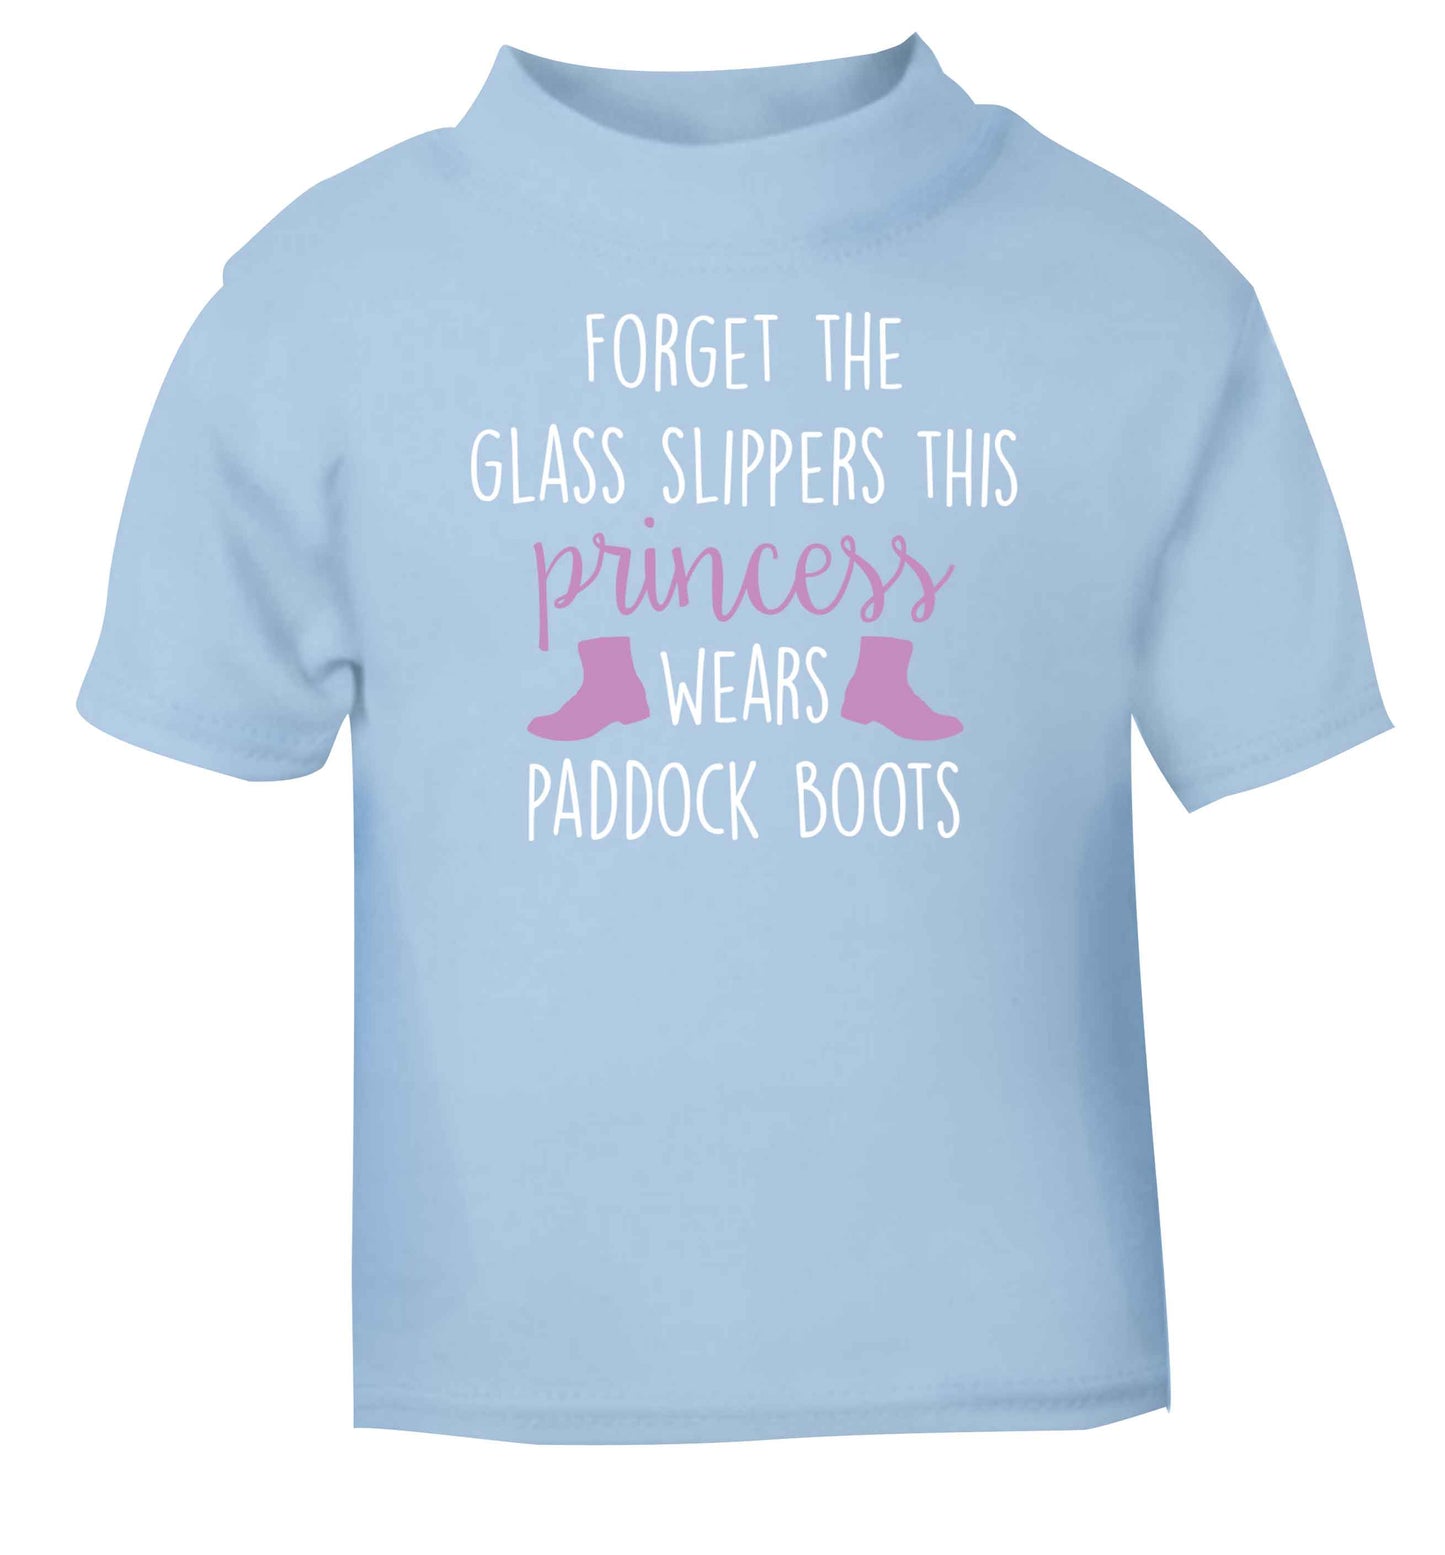 Forget the glass slippers this princess wears paddock boots light blue baby toddler Tshirt 2 Years